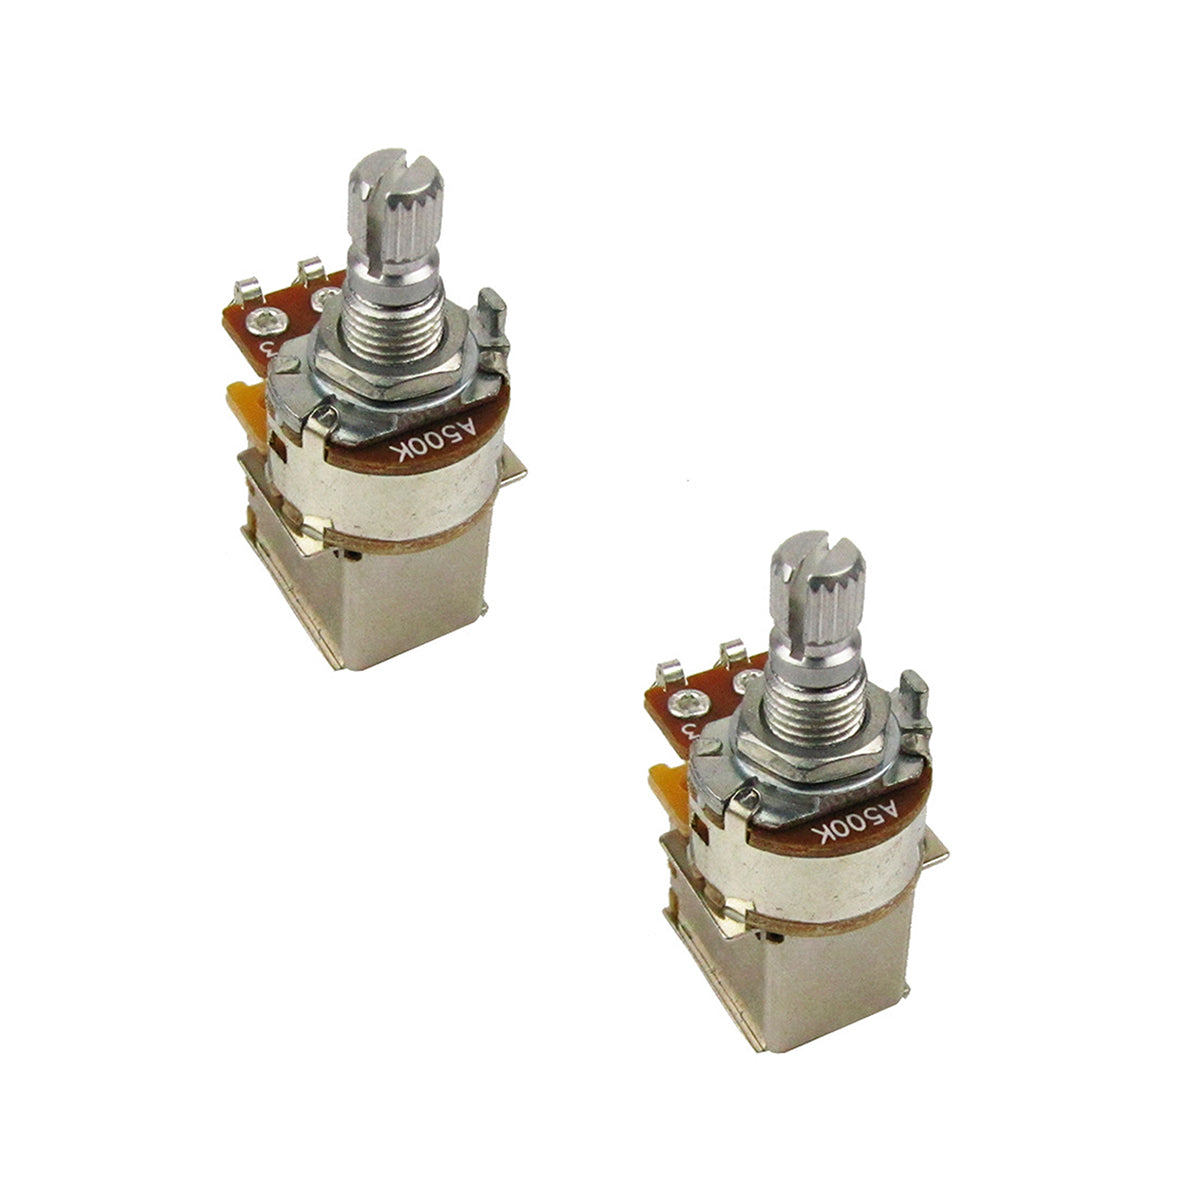 Musiclily Metric 15mm Split Shaft Pots A500k Push Pull Potentiometers(2 Pieces)